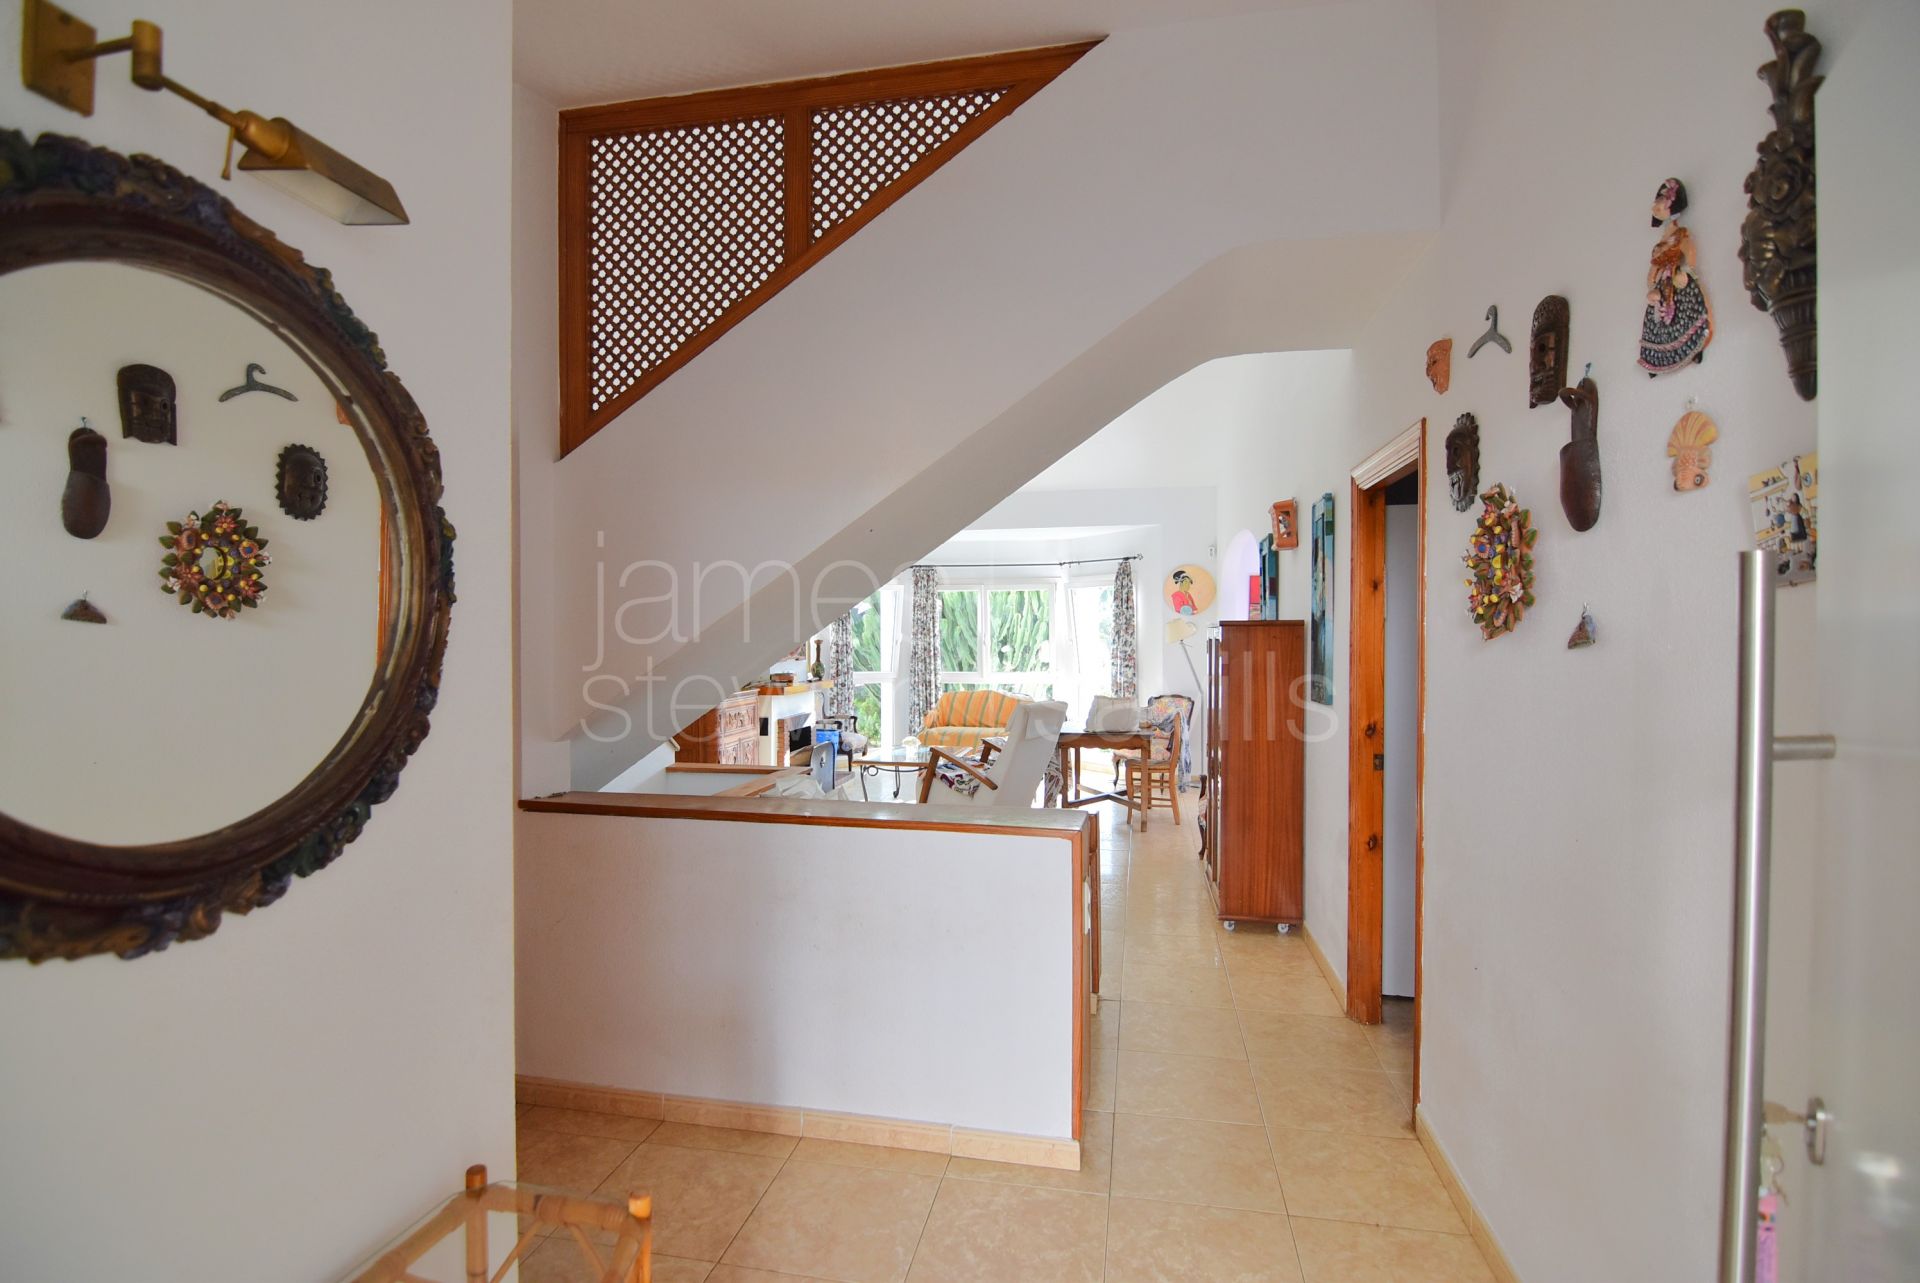 Semi- detached house in a quiet area near Torreguadiaro Beach: An Ideal Family Home